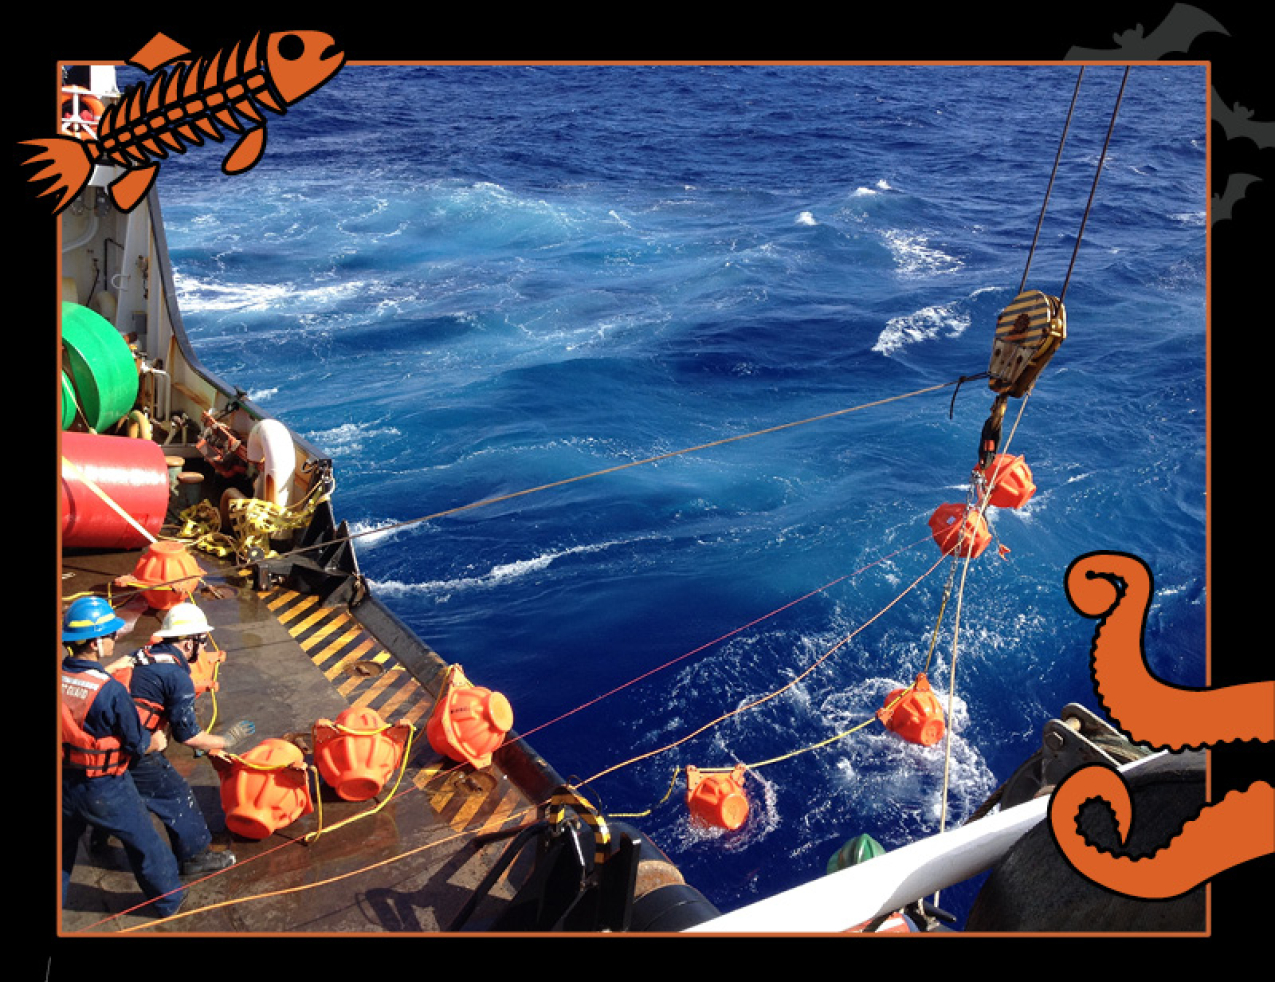 An aerial view of a ship crew recovering a hydrophone from the ocean. There are people on board the vessel with hard hats and life jackets who are using a pulley system to hoist the hydrophone out of the water. Border of the photo is black with orange sea creature graphics of octopus tentacles and a fish skeleton. Text: Sounds of the Mariana Trench, #NOAASpookyScience with NOAA logo.